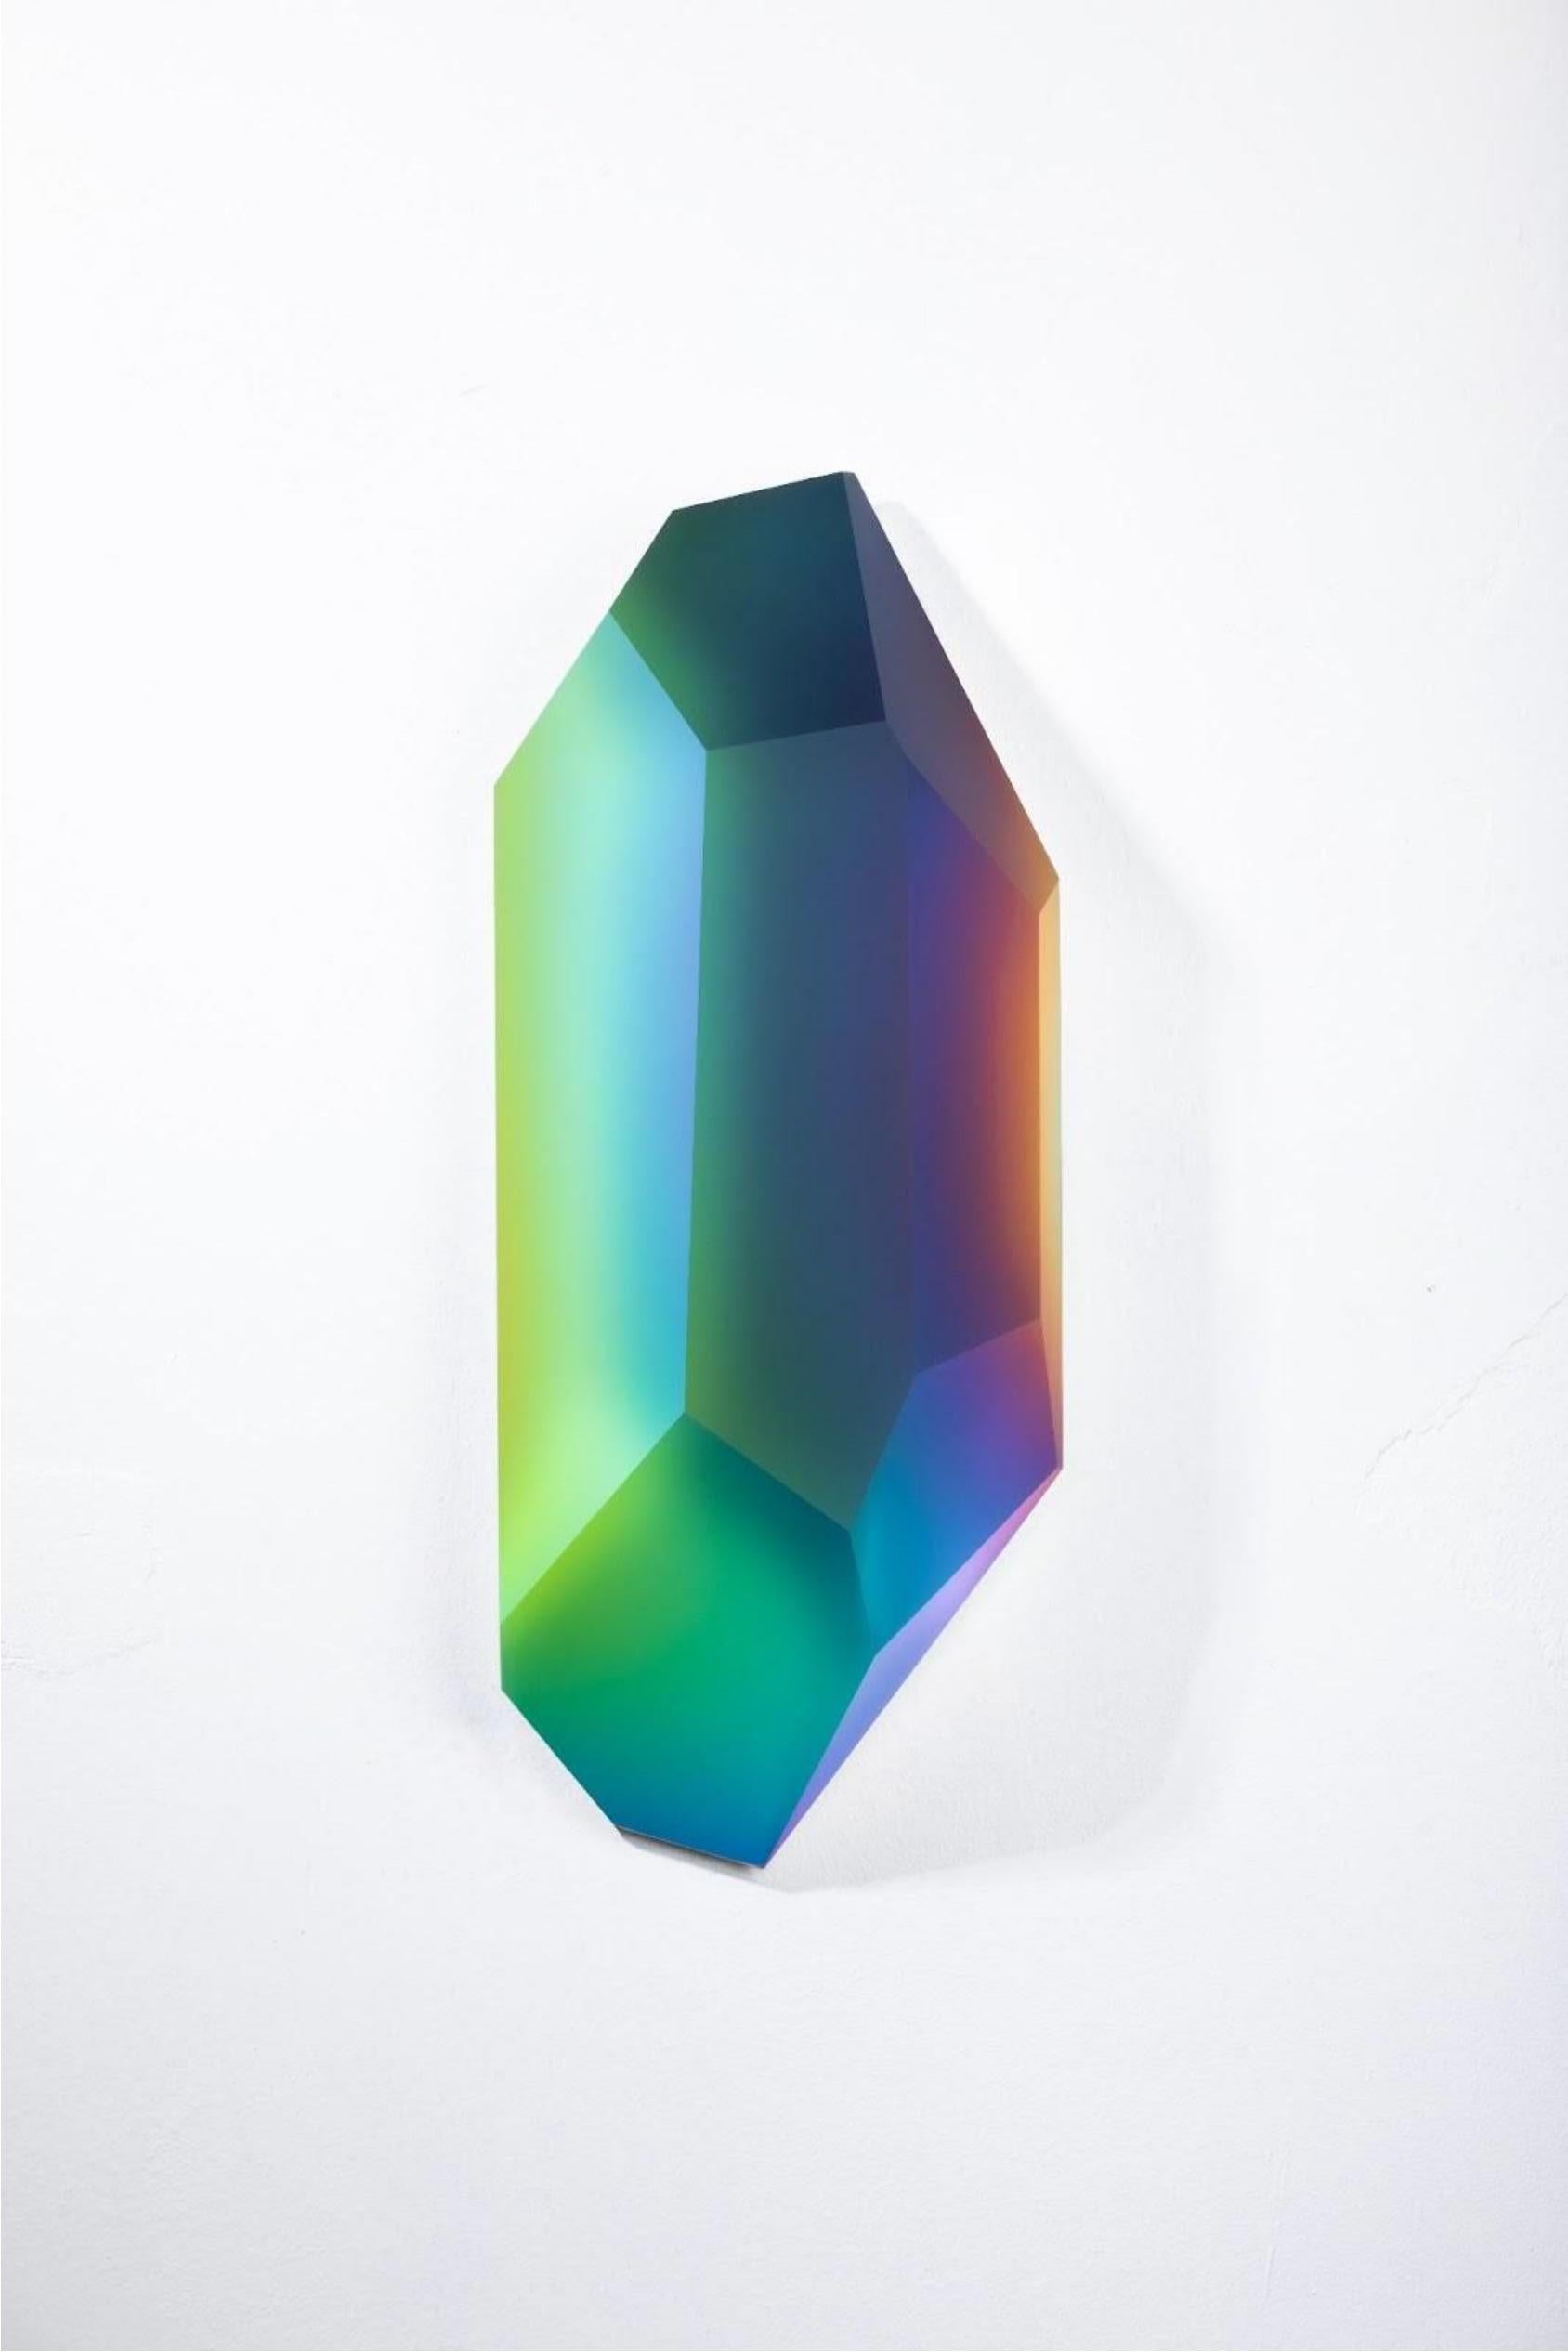 Pretty Mirage 0906 by Lukas Novak
Dimensions: W 12 x D 23 x H 54 cm
Materials: Cut Glass, Crystal, Color Gradient

The Pretty Mirage series is made out of wall crystals. It is a unique composition of cuts in glass and a color gradient. Lukas Novak